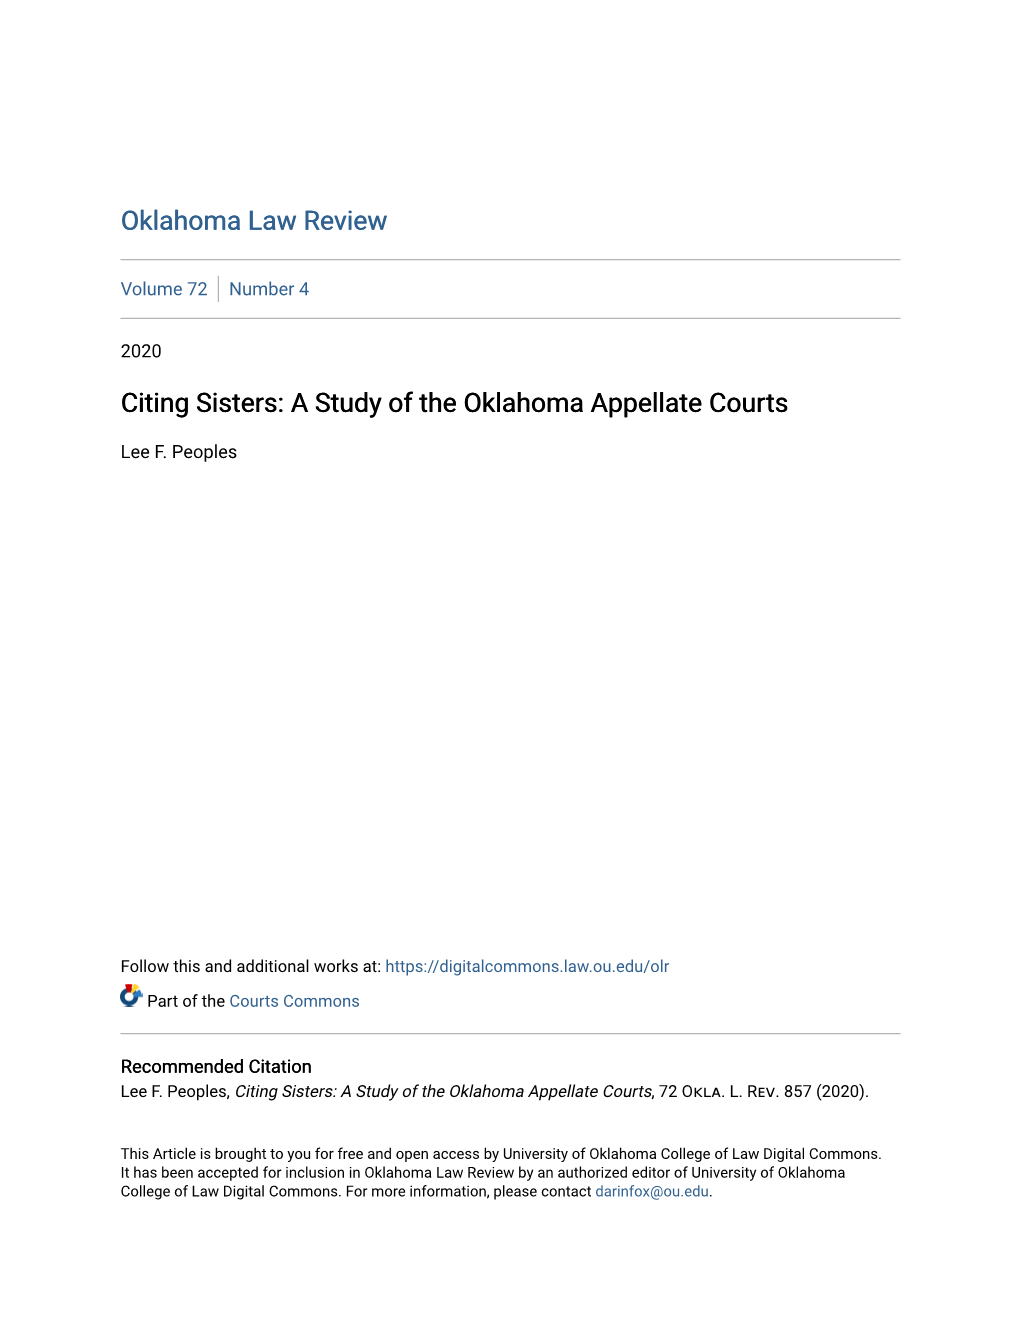 A Study of the Oklahoma Appellate Courts